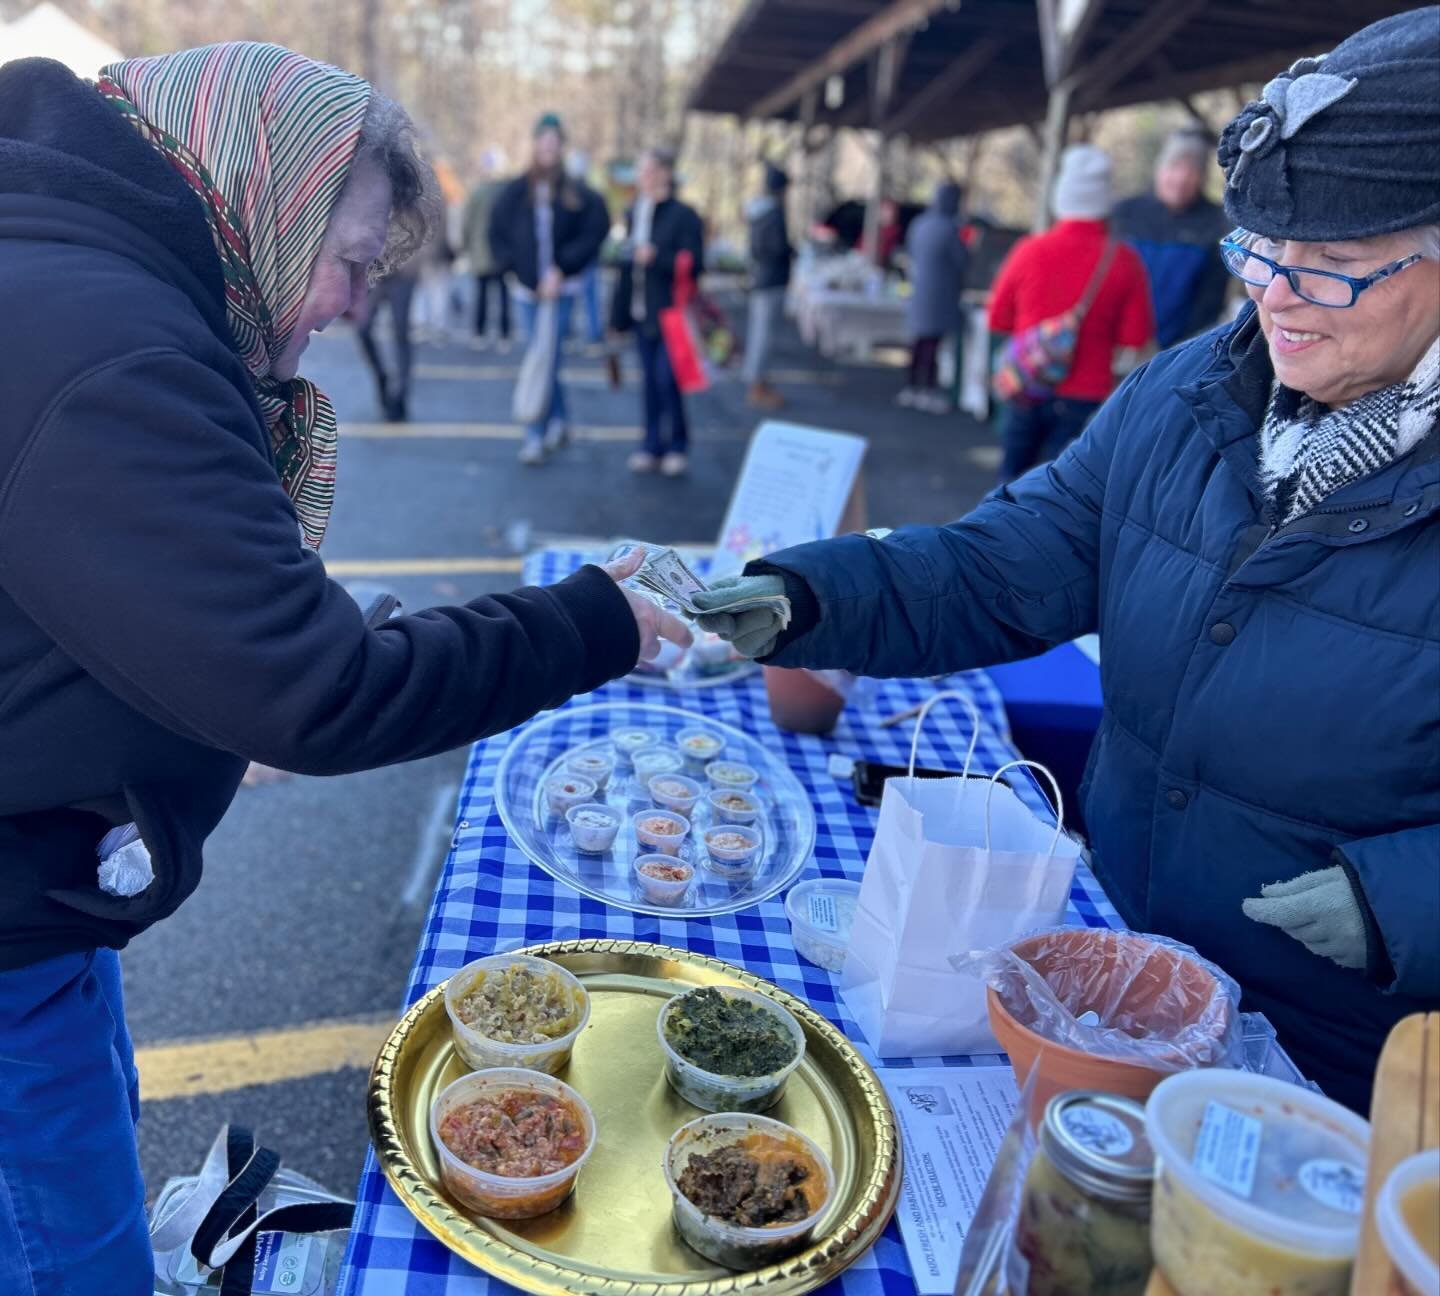 🎉Hooray!!! It&rsquo;s Market Day!!! Don&rsquo;t let this windy weather or the road closure detours around town keep you away, we&rsquo;ve got sunshine ☀️ and so much in store for you right here, right now at the Watauga County Farmers&rsquo; Market!